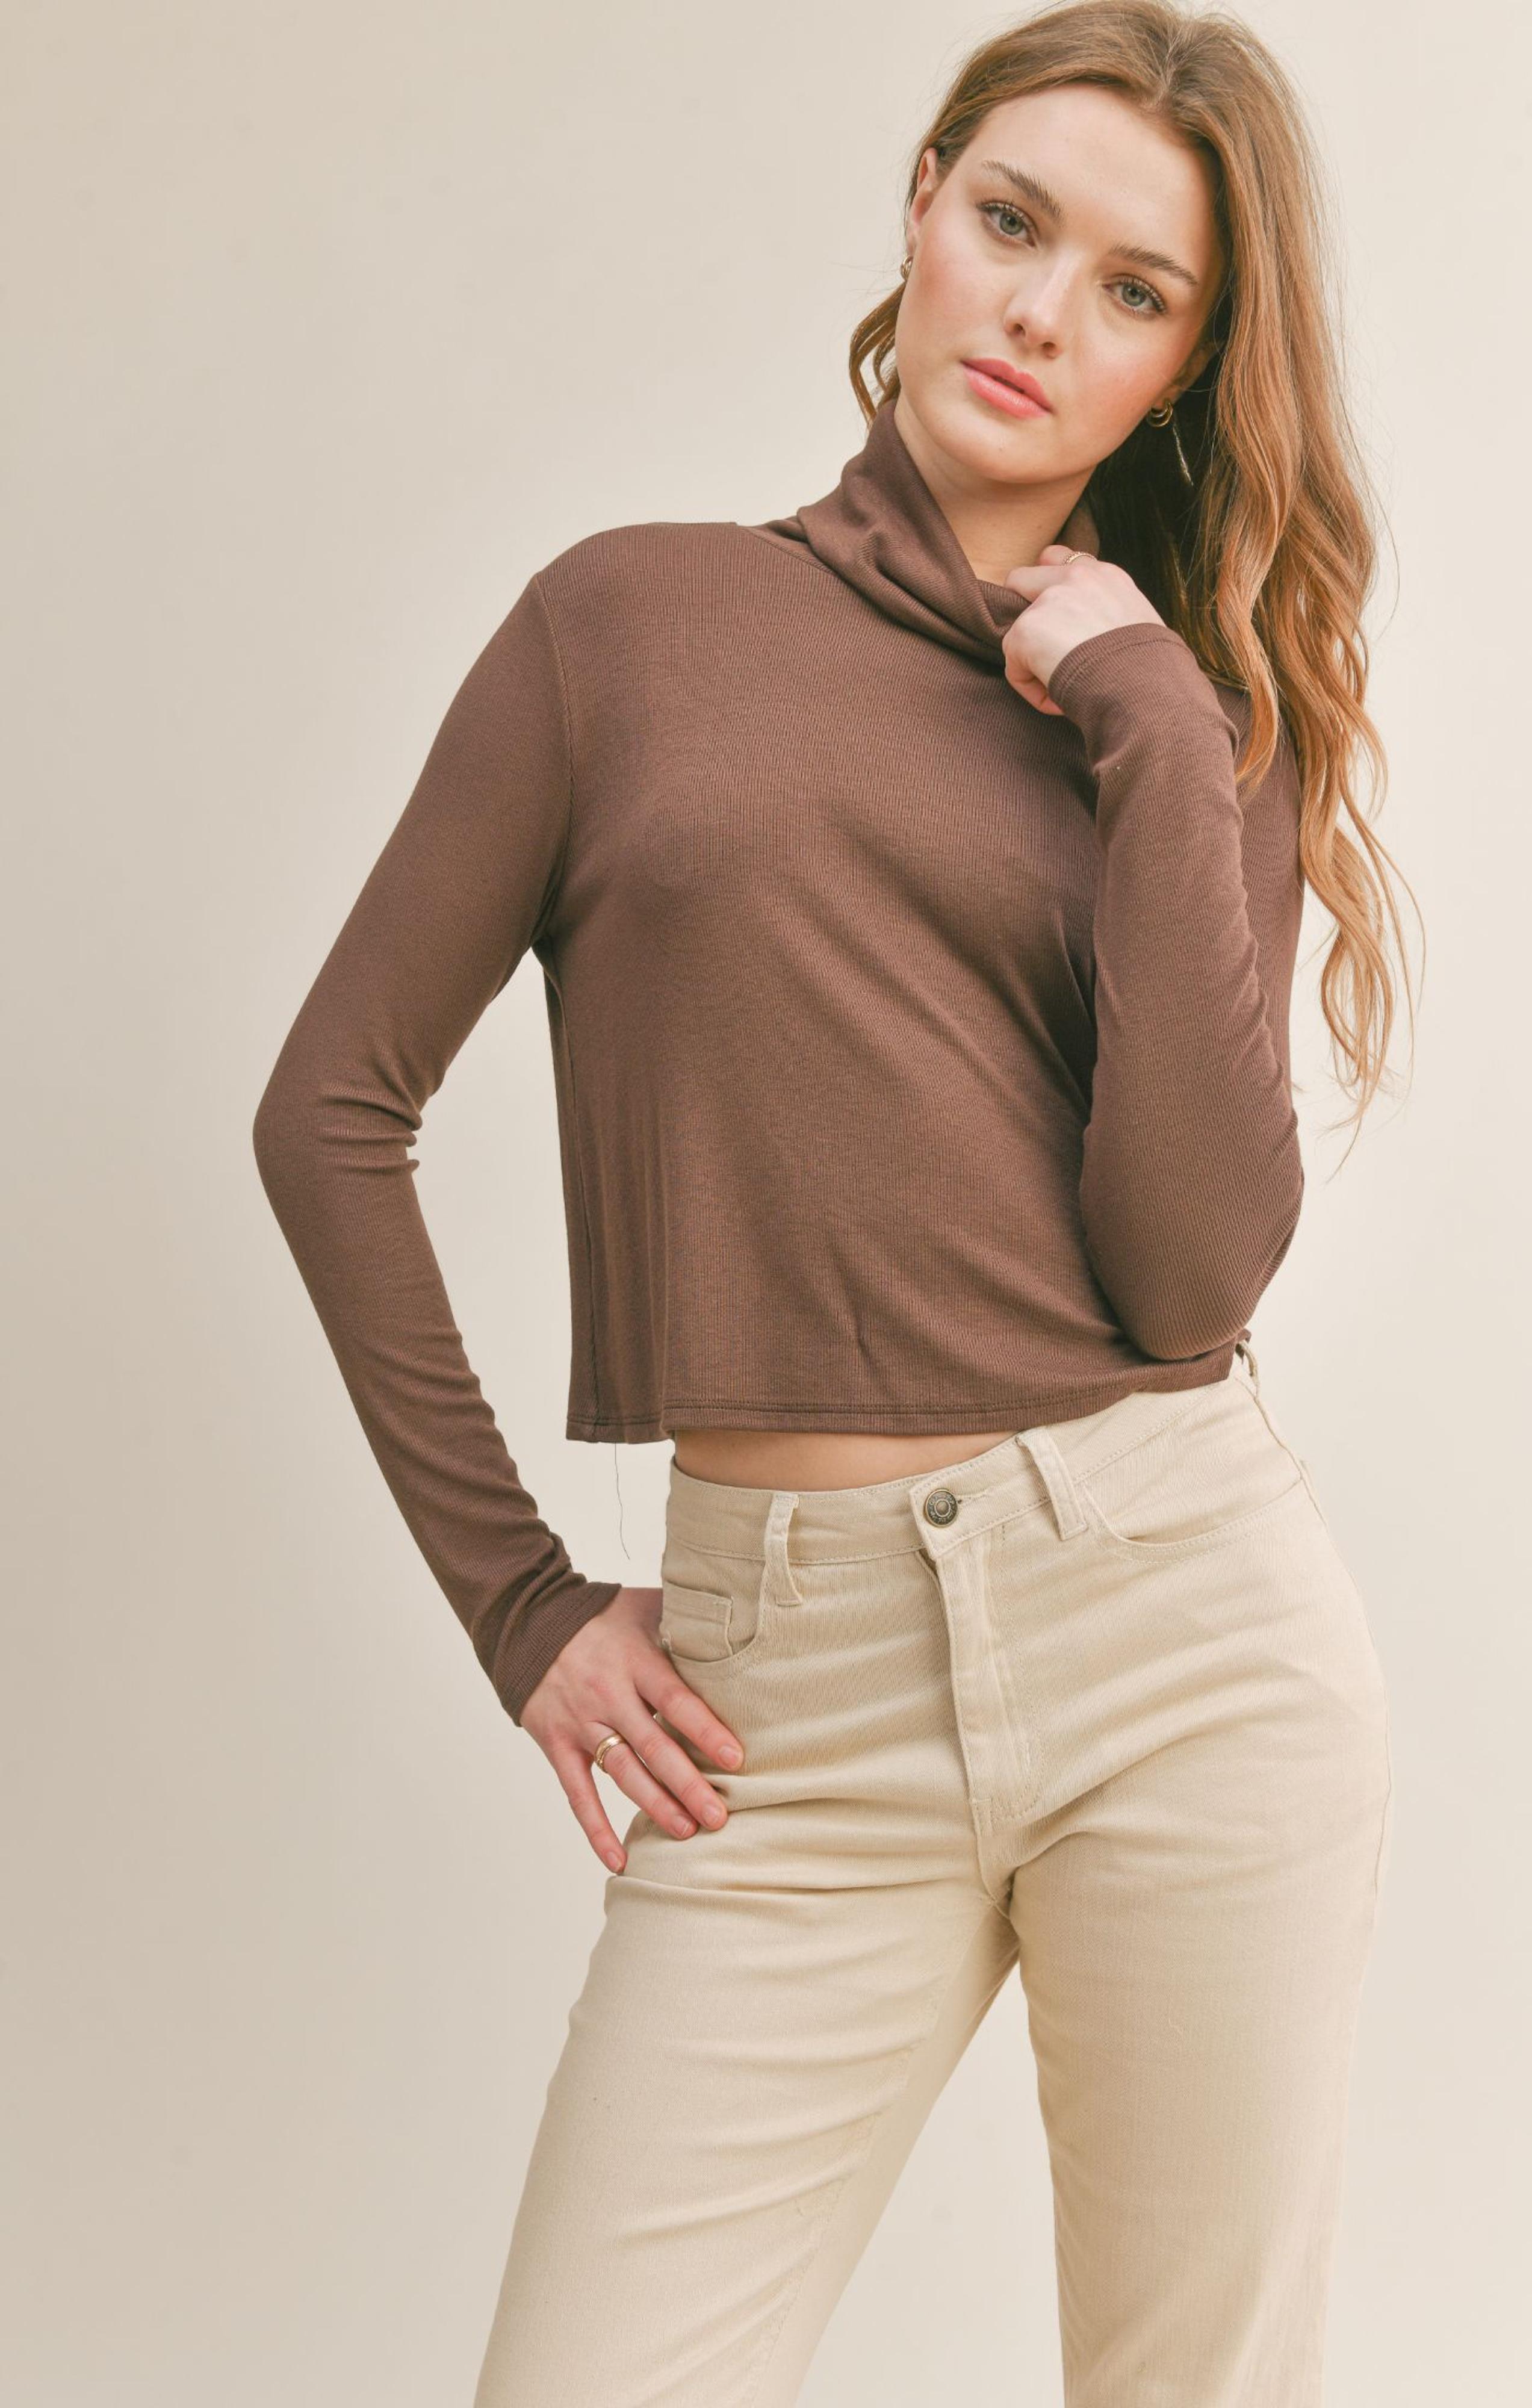  S ` Mores Turtle Neck Top